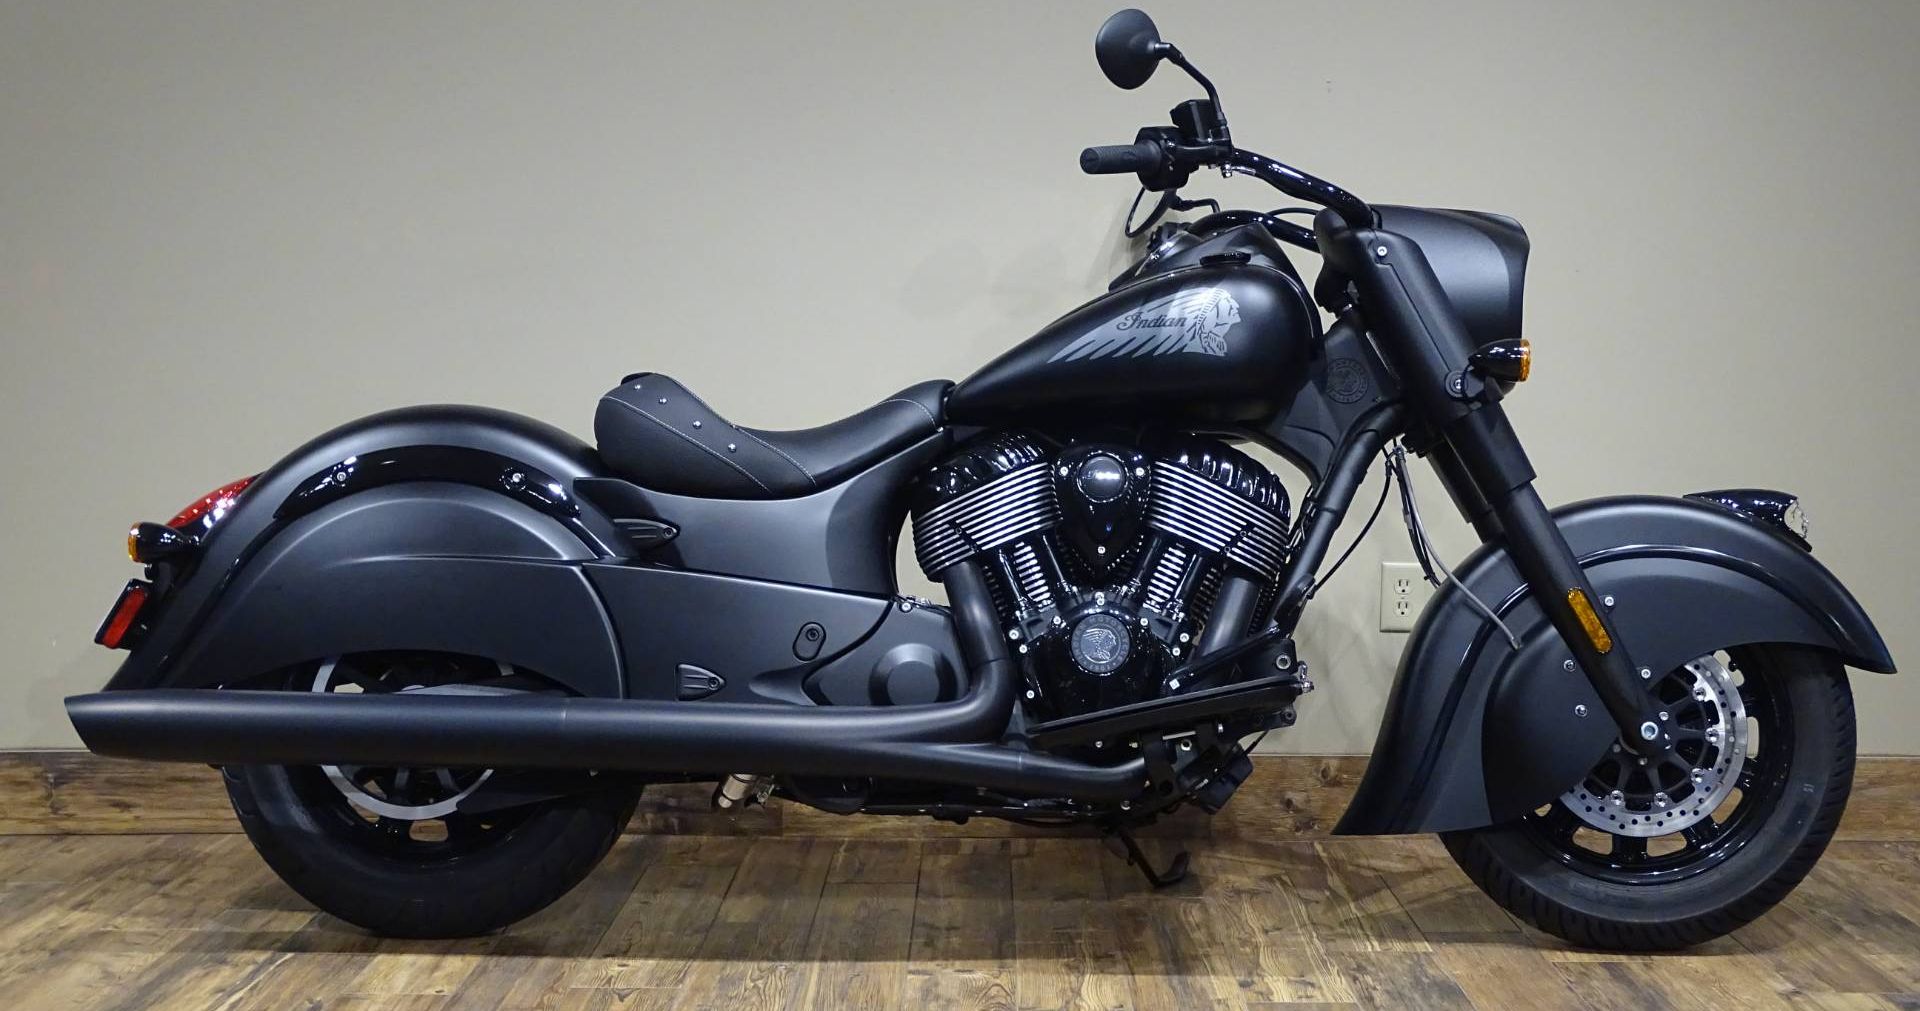 Blacked Out Indian Chief Dark Horse Perfectly Suited To My Tastes